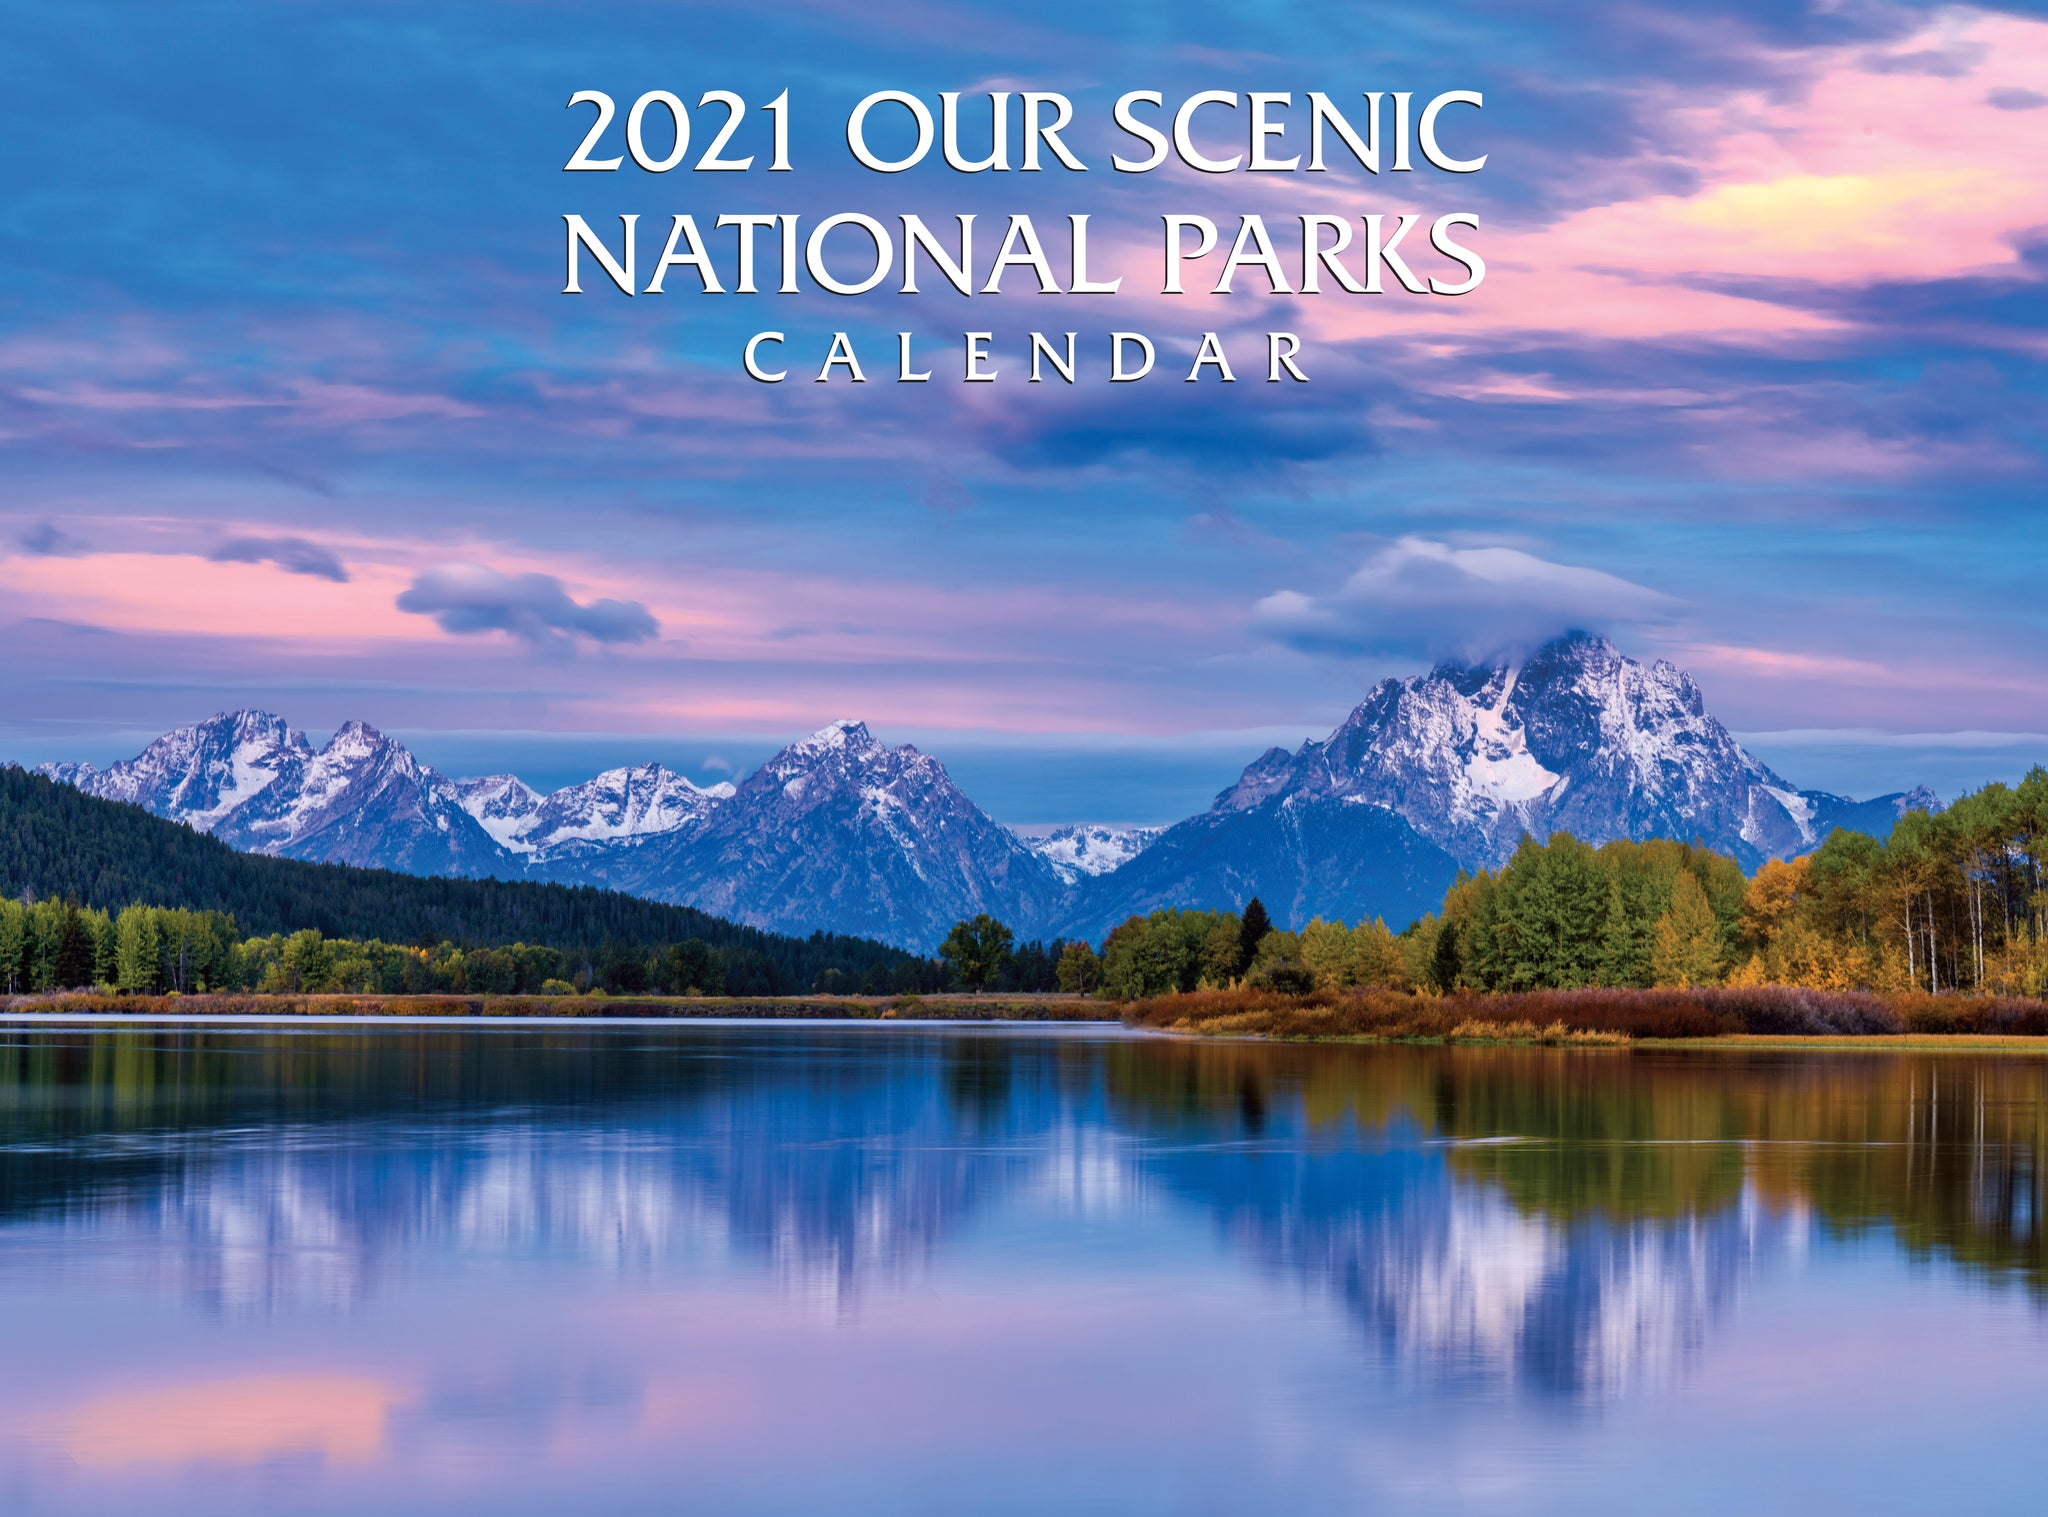 2021-our-scenic-national-parks-calendar-silver-creek-press